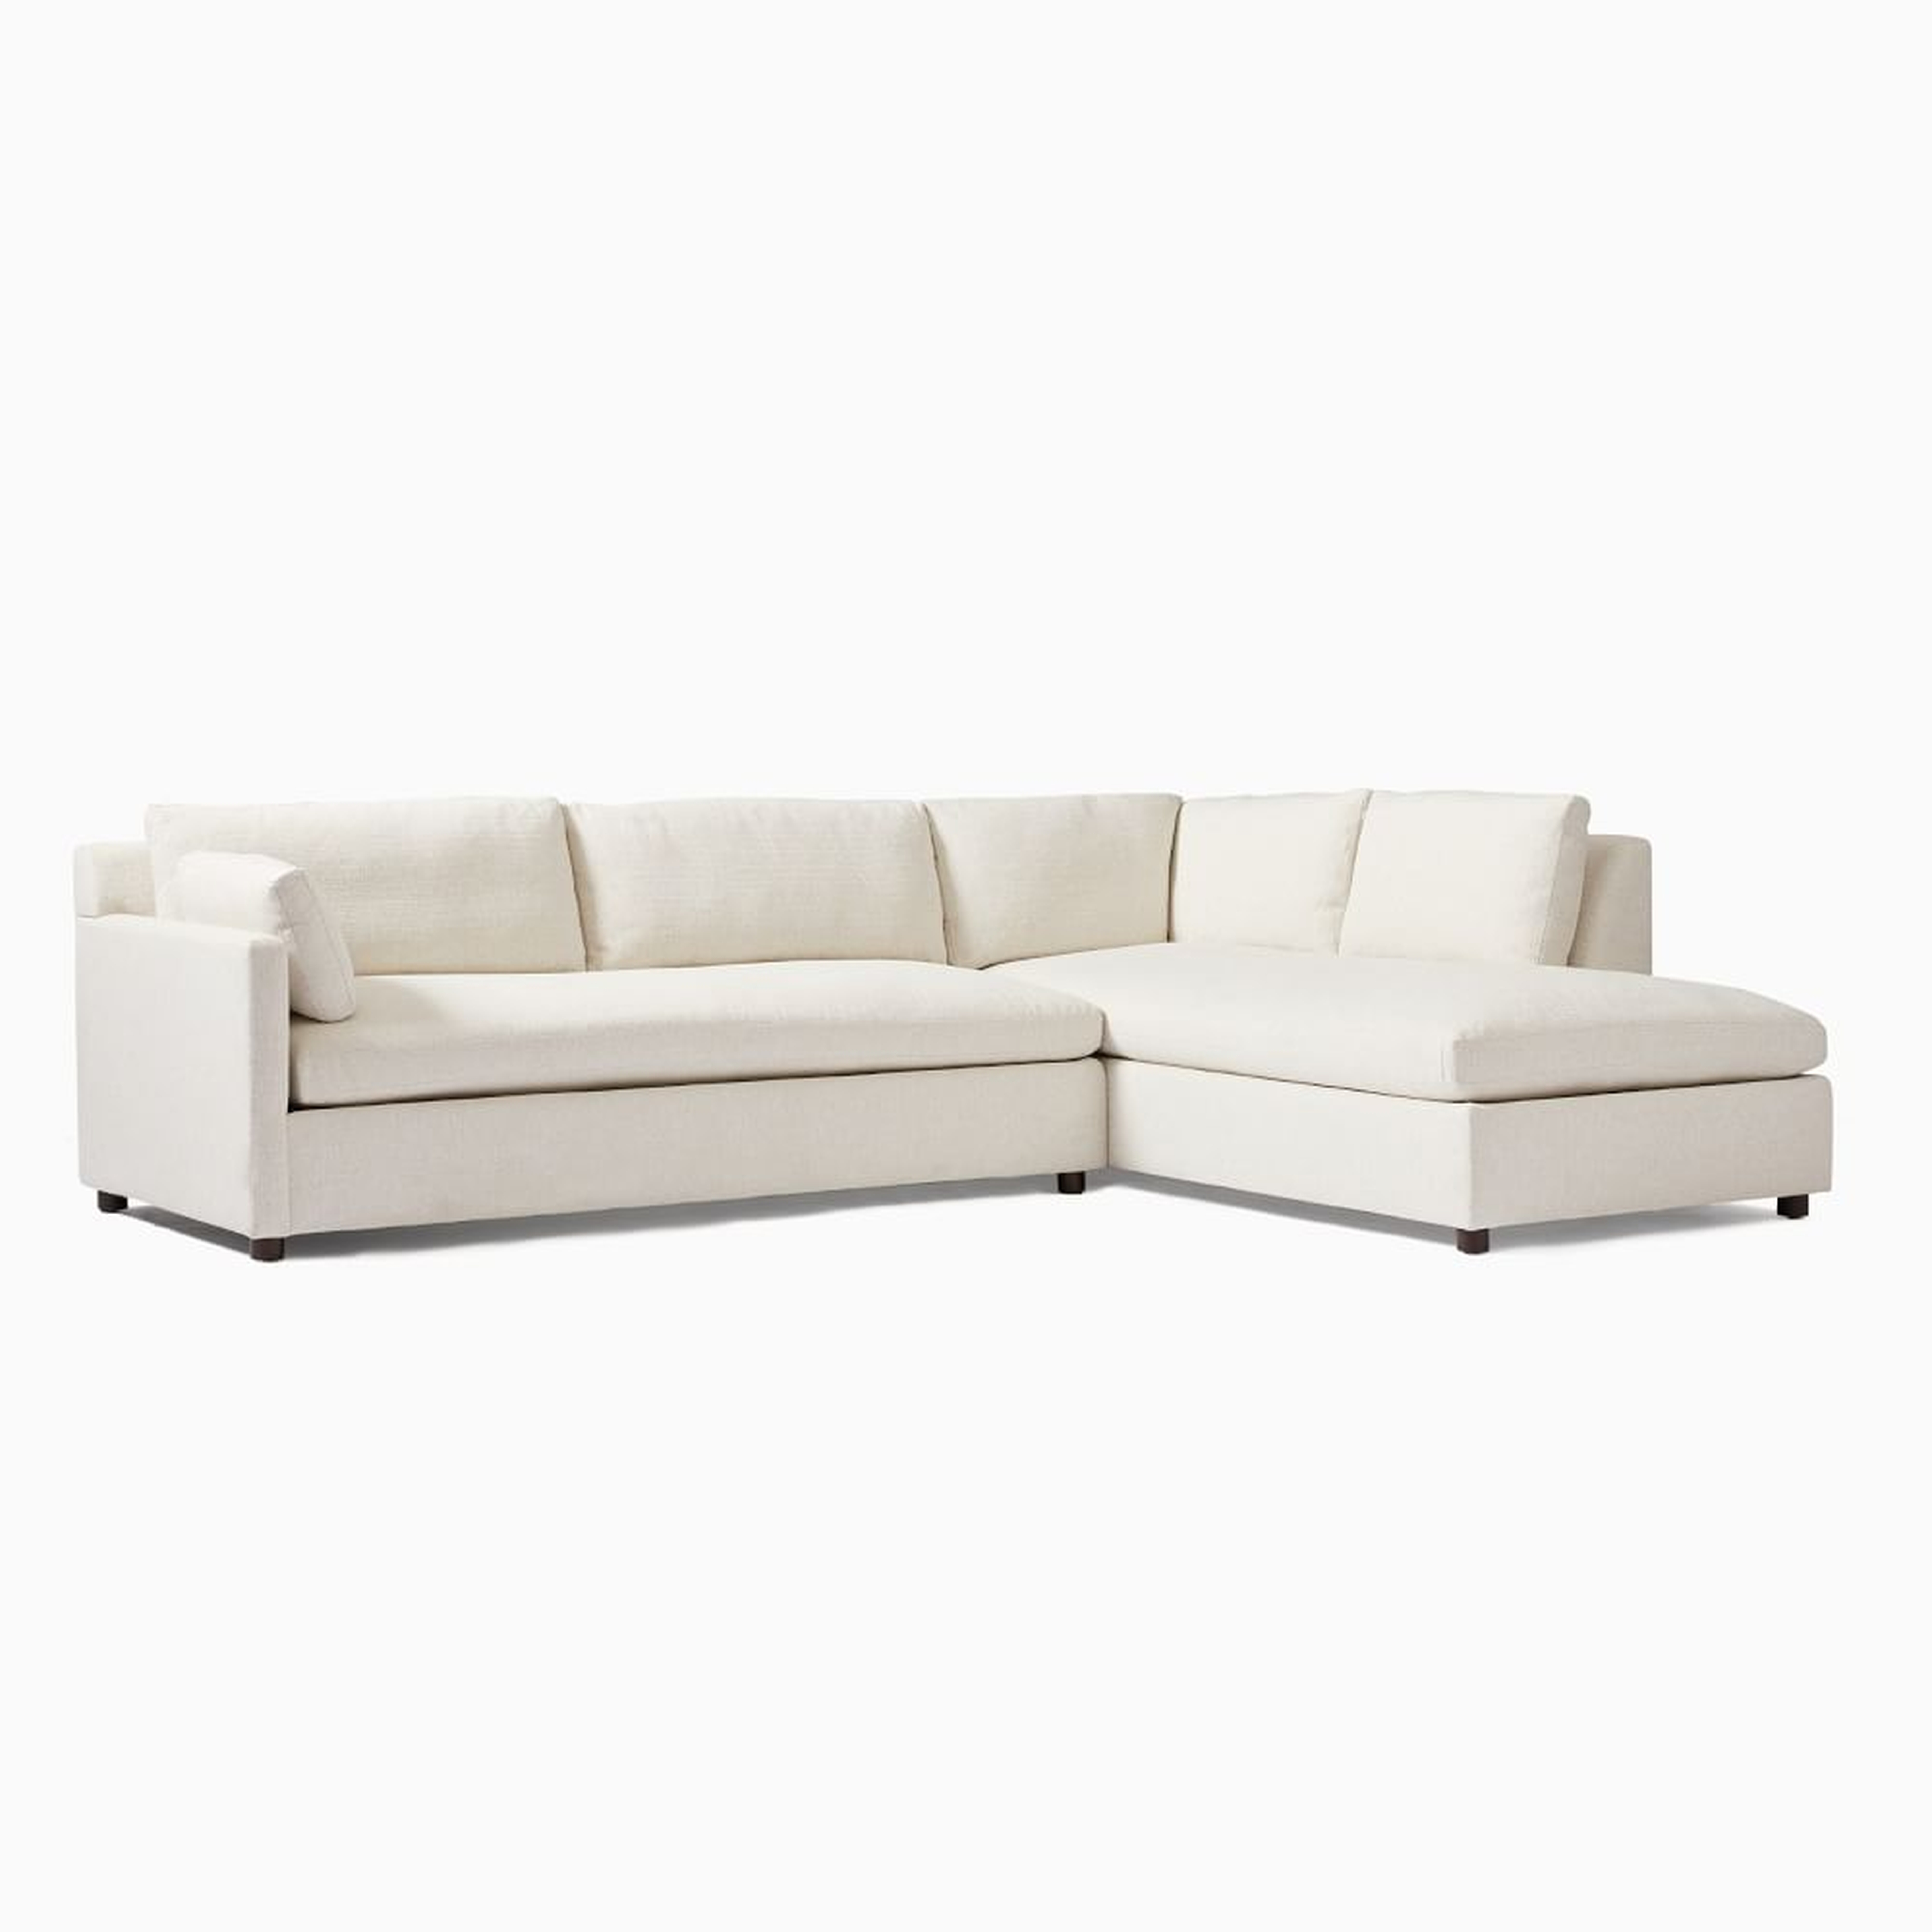 Marin 114" Right 2-Piece Bumper Chaise Sectional, Standard Depth, Performance Basketweave, Alabaster - West Elm